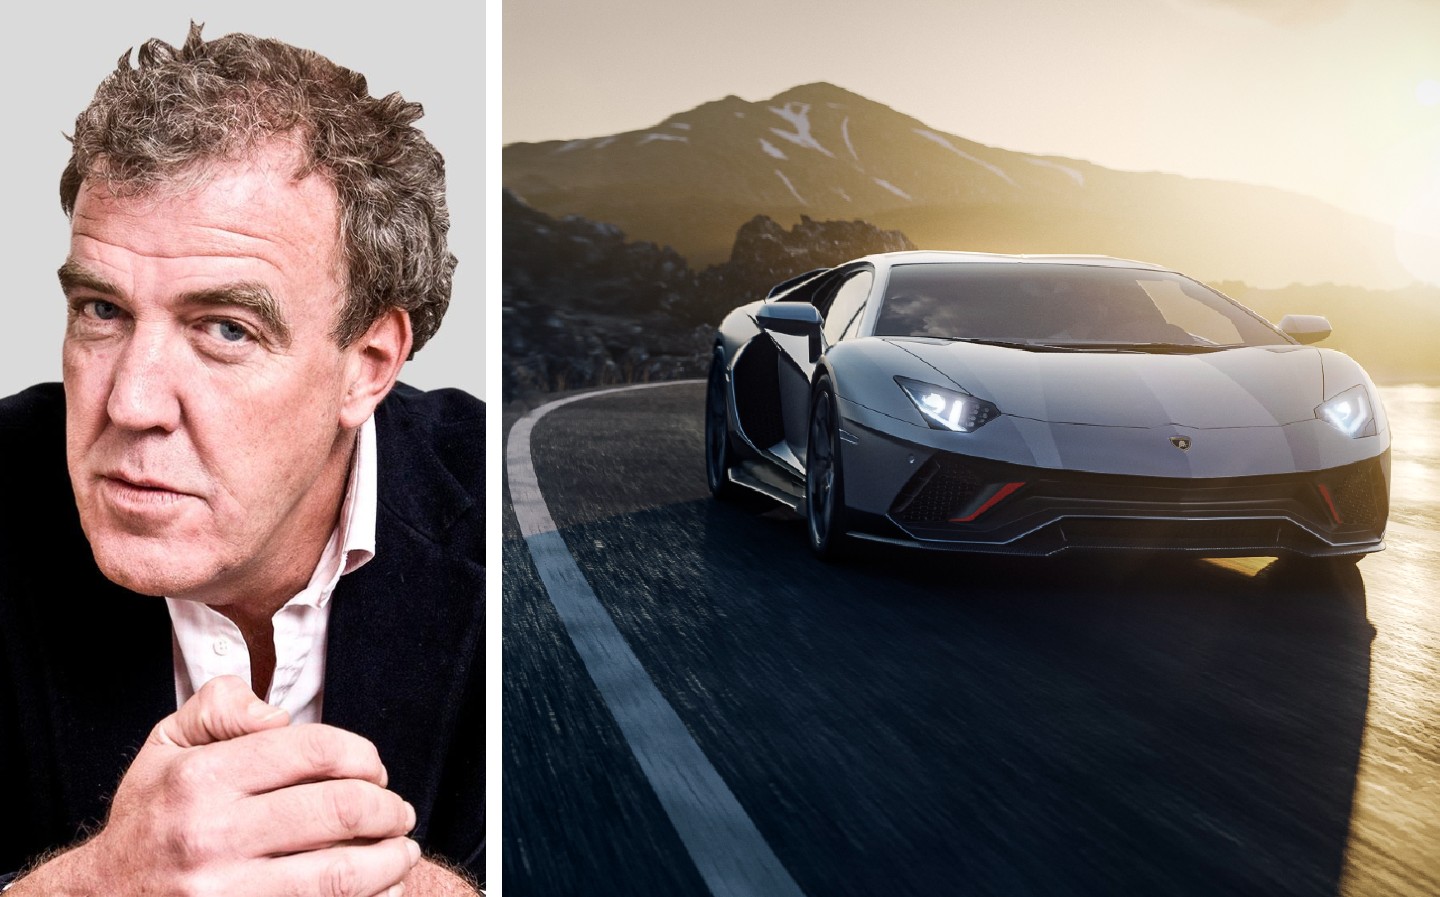 Jeremy Clarkson: The Lamborghini Aventador Ultimae is as socially unacceptable as an attack dog